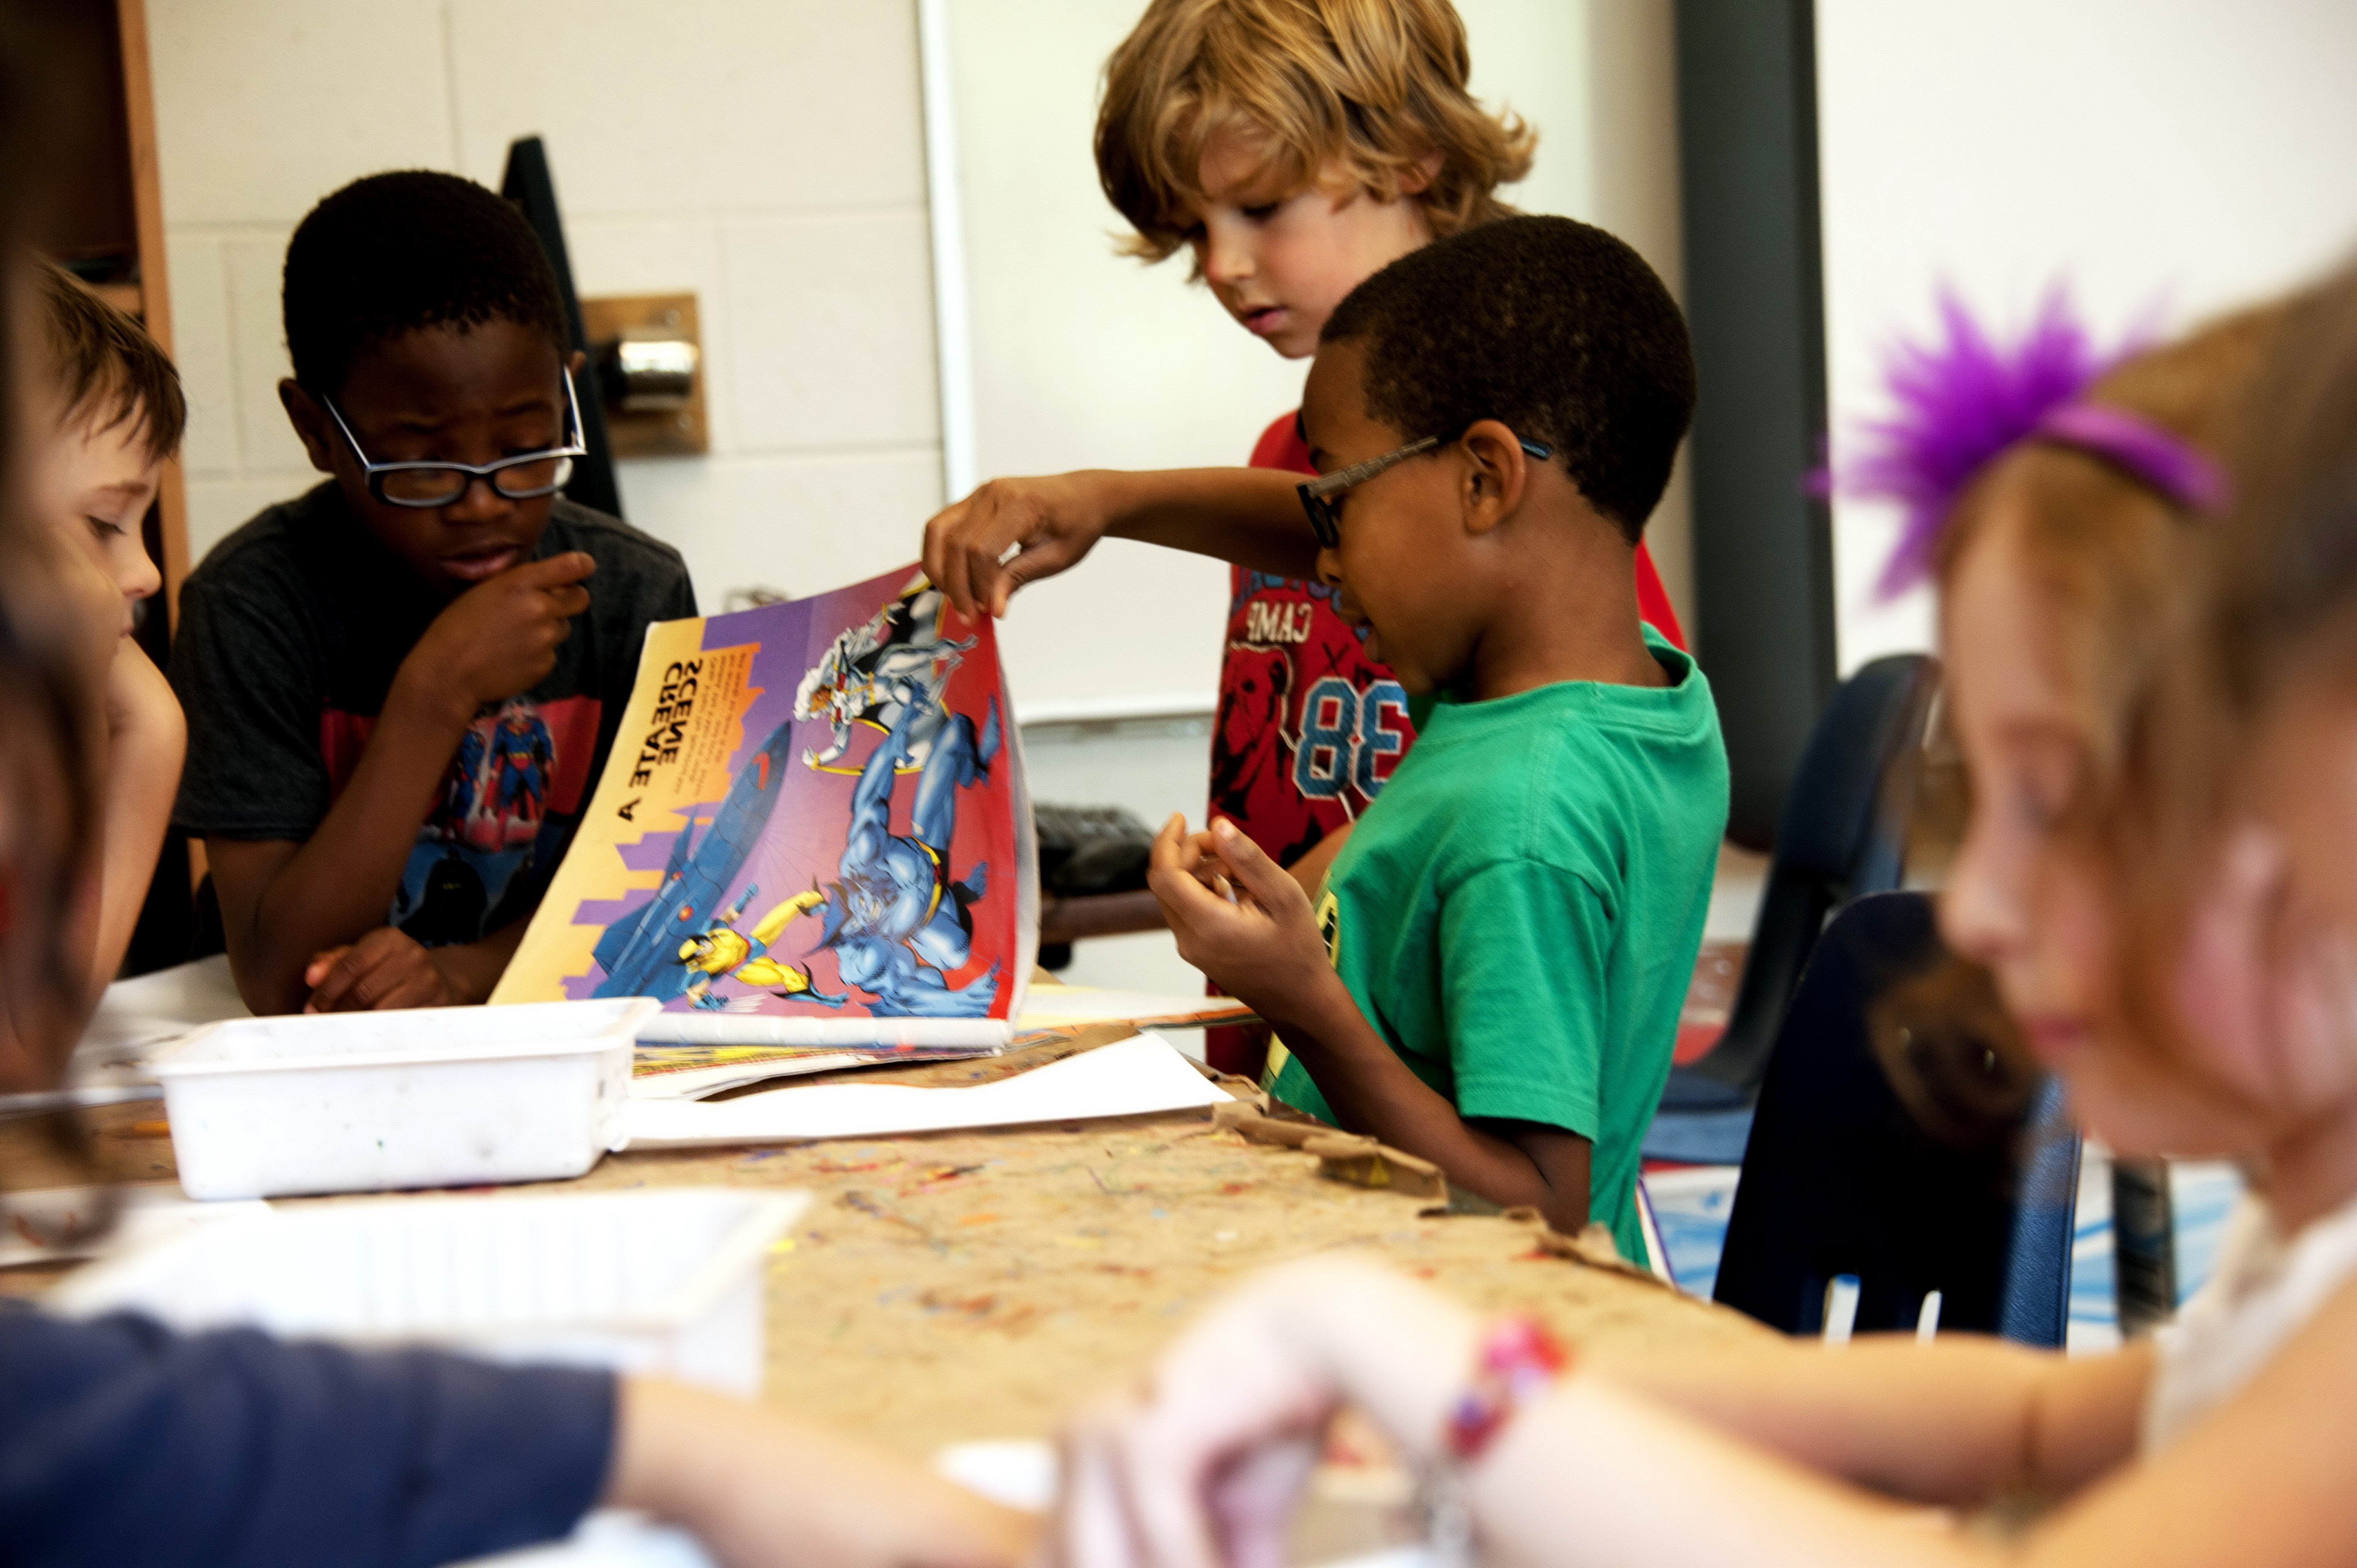 Elementary students talking at a table and sharing a comic book.